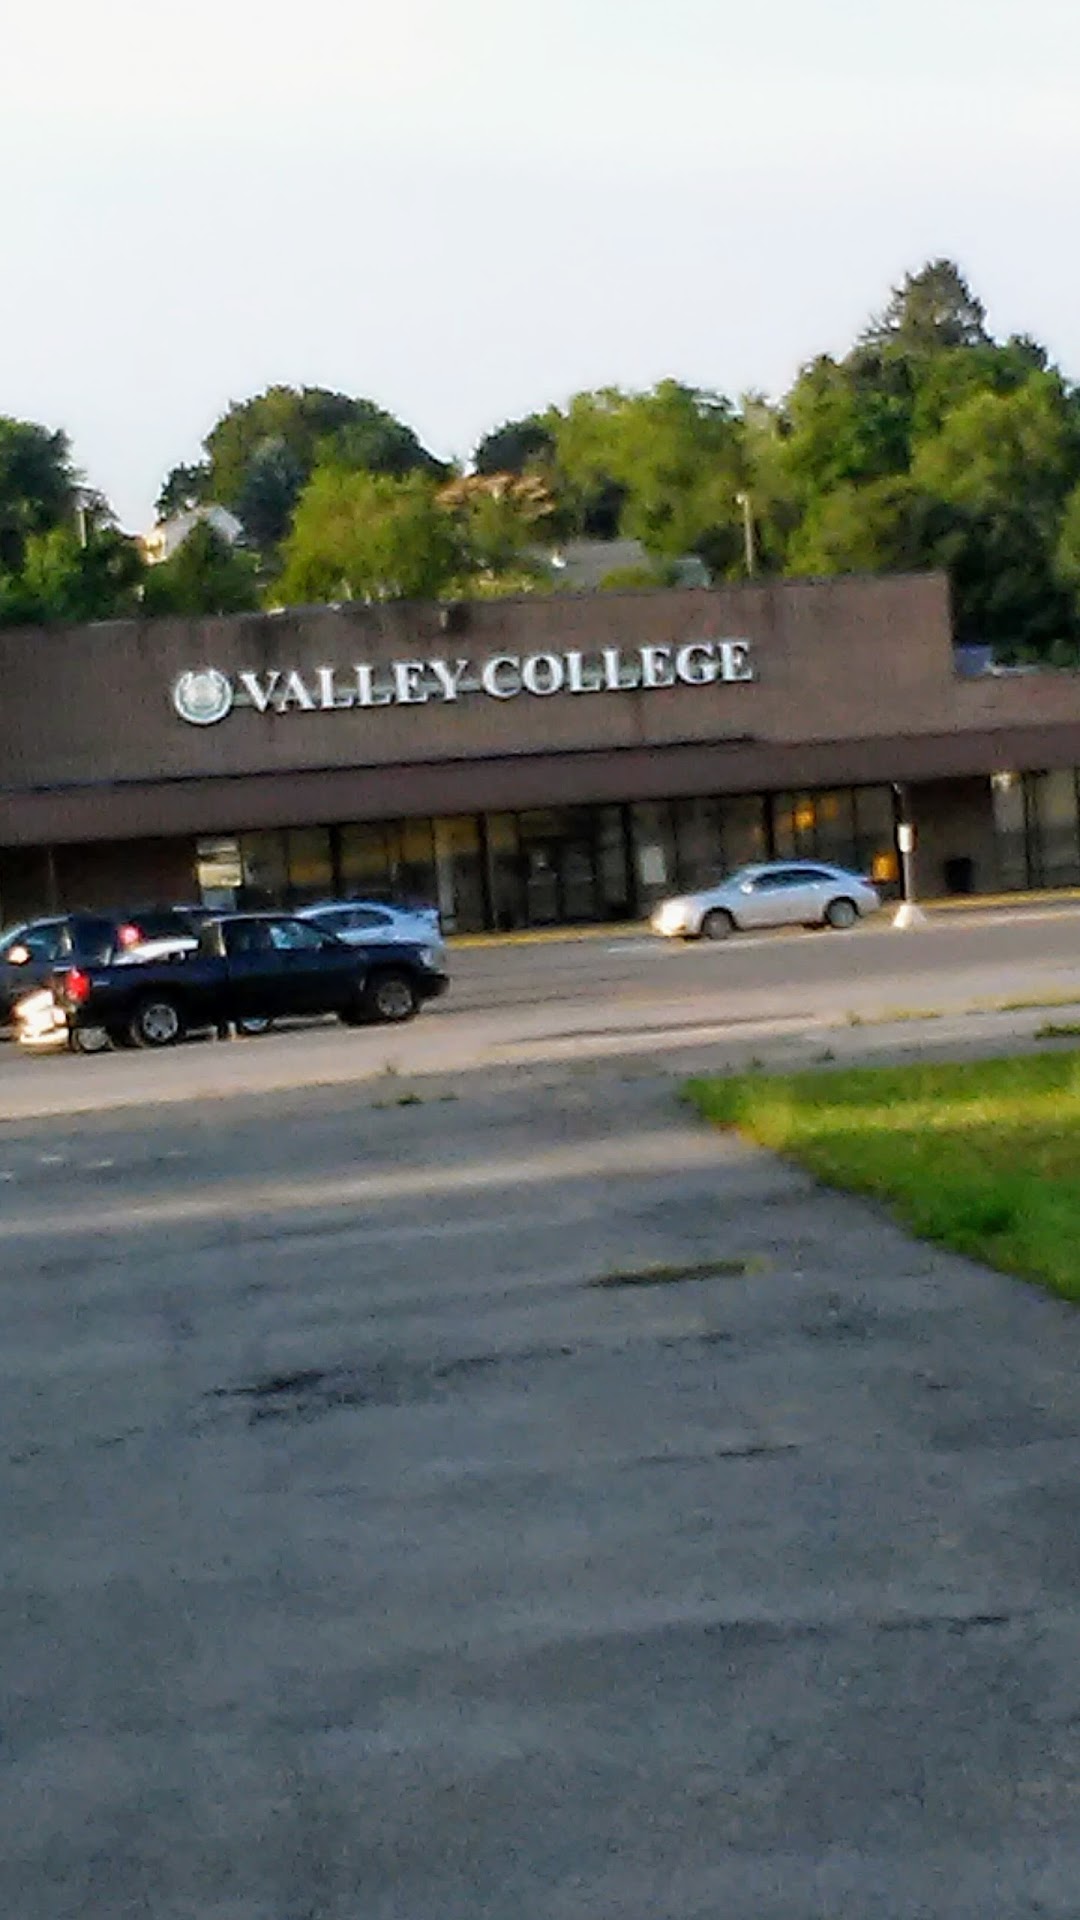 Valley College